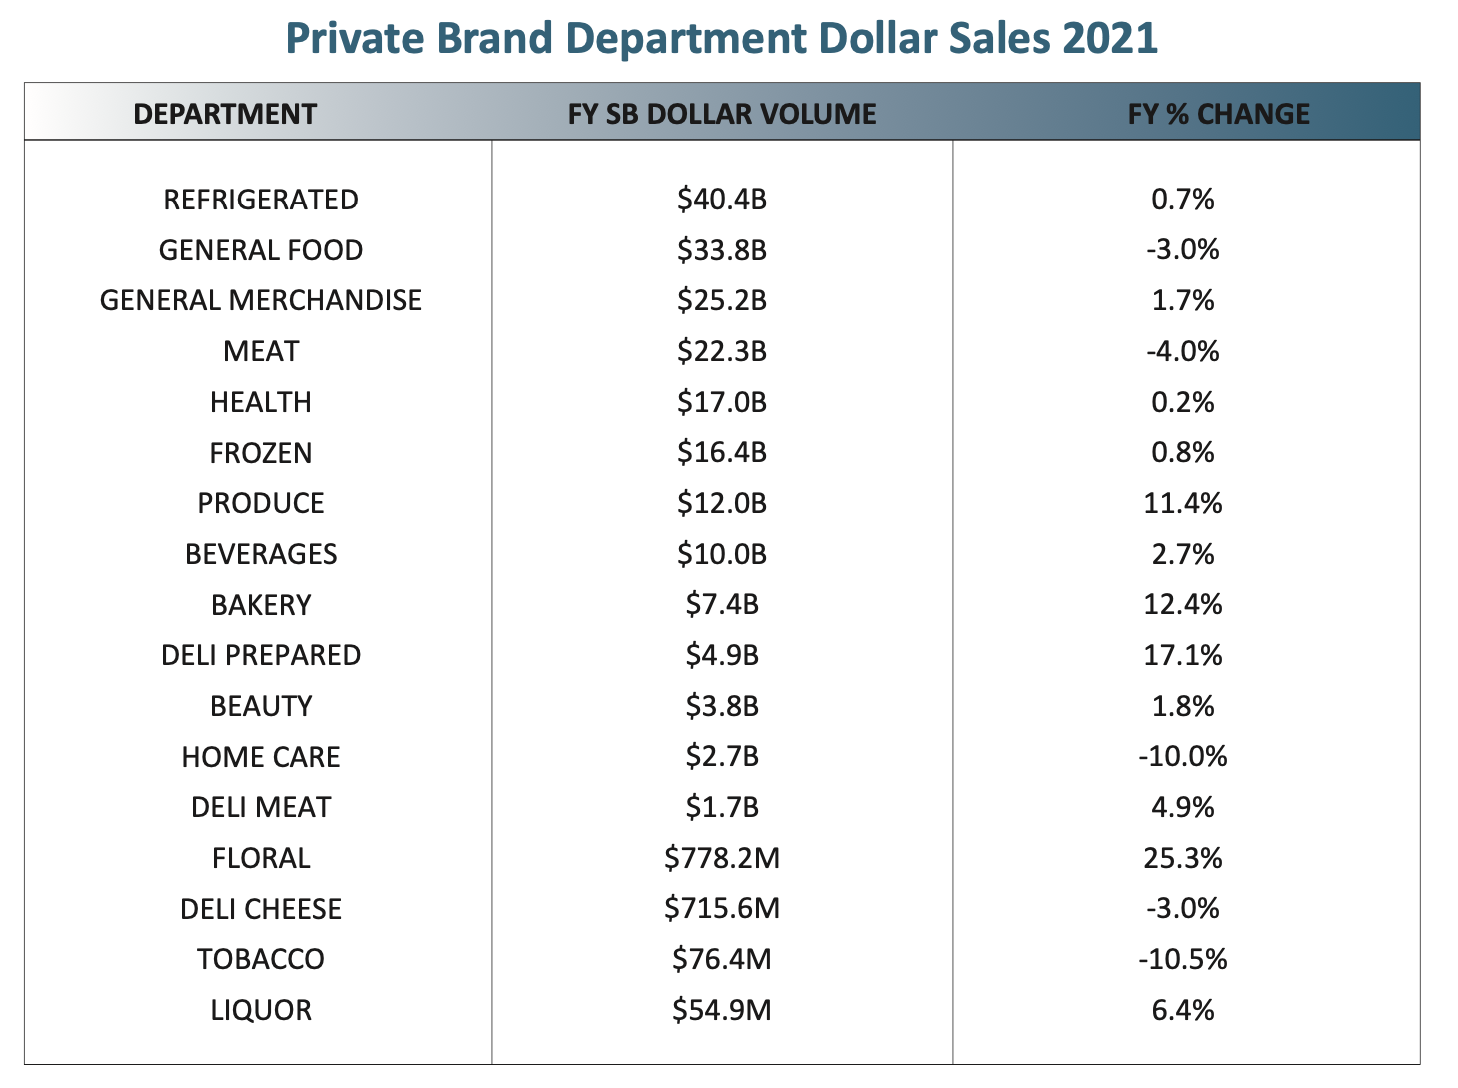 20%  brands account for 80% of private brand sales